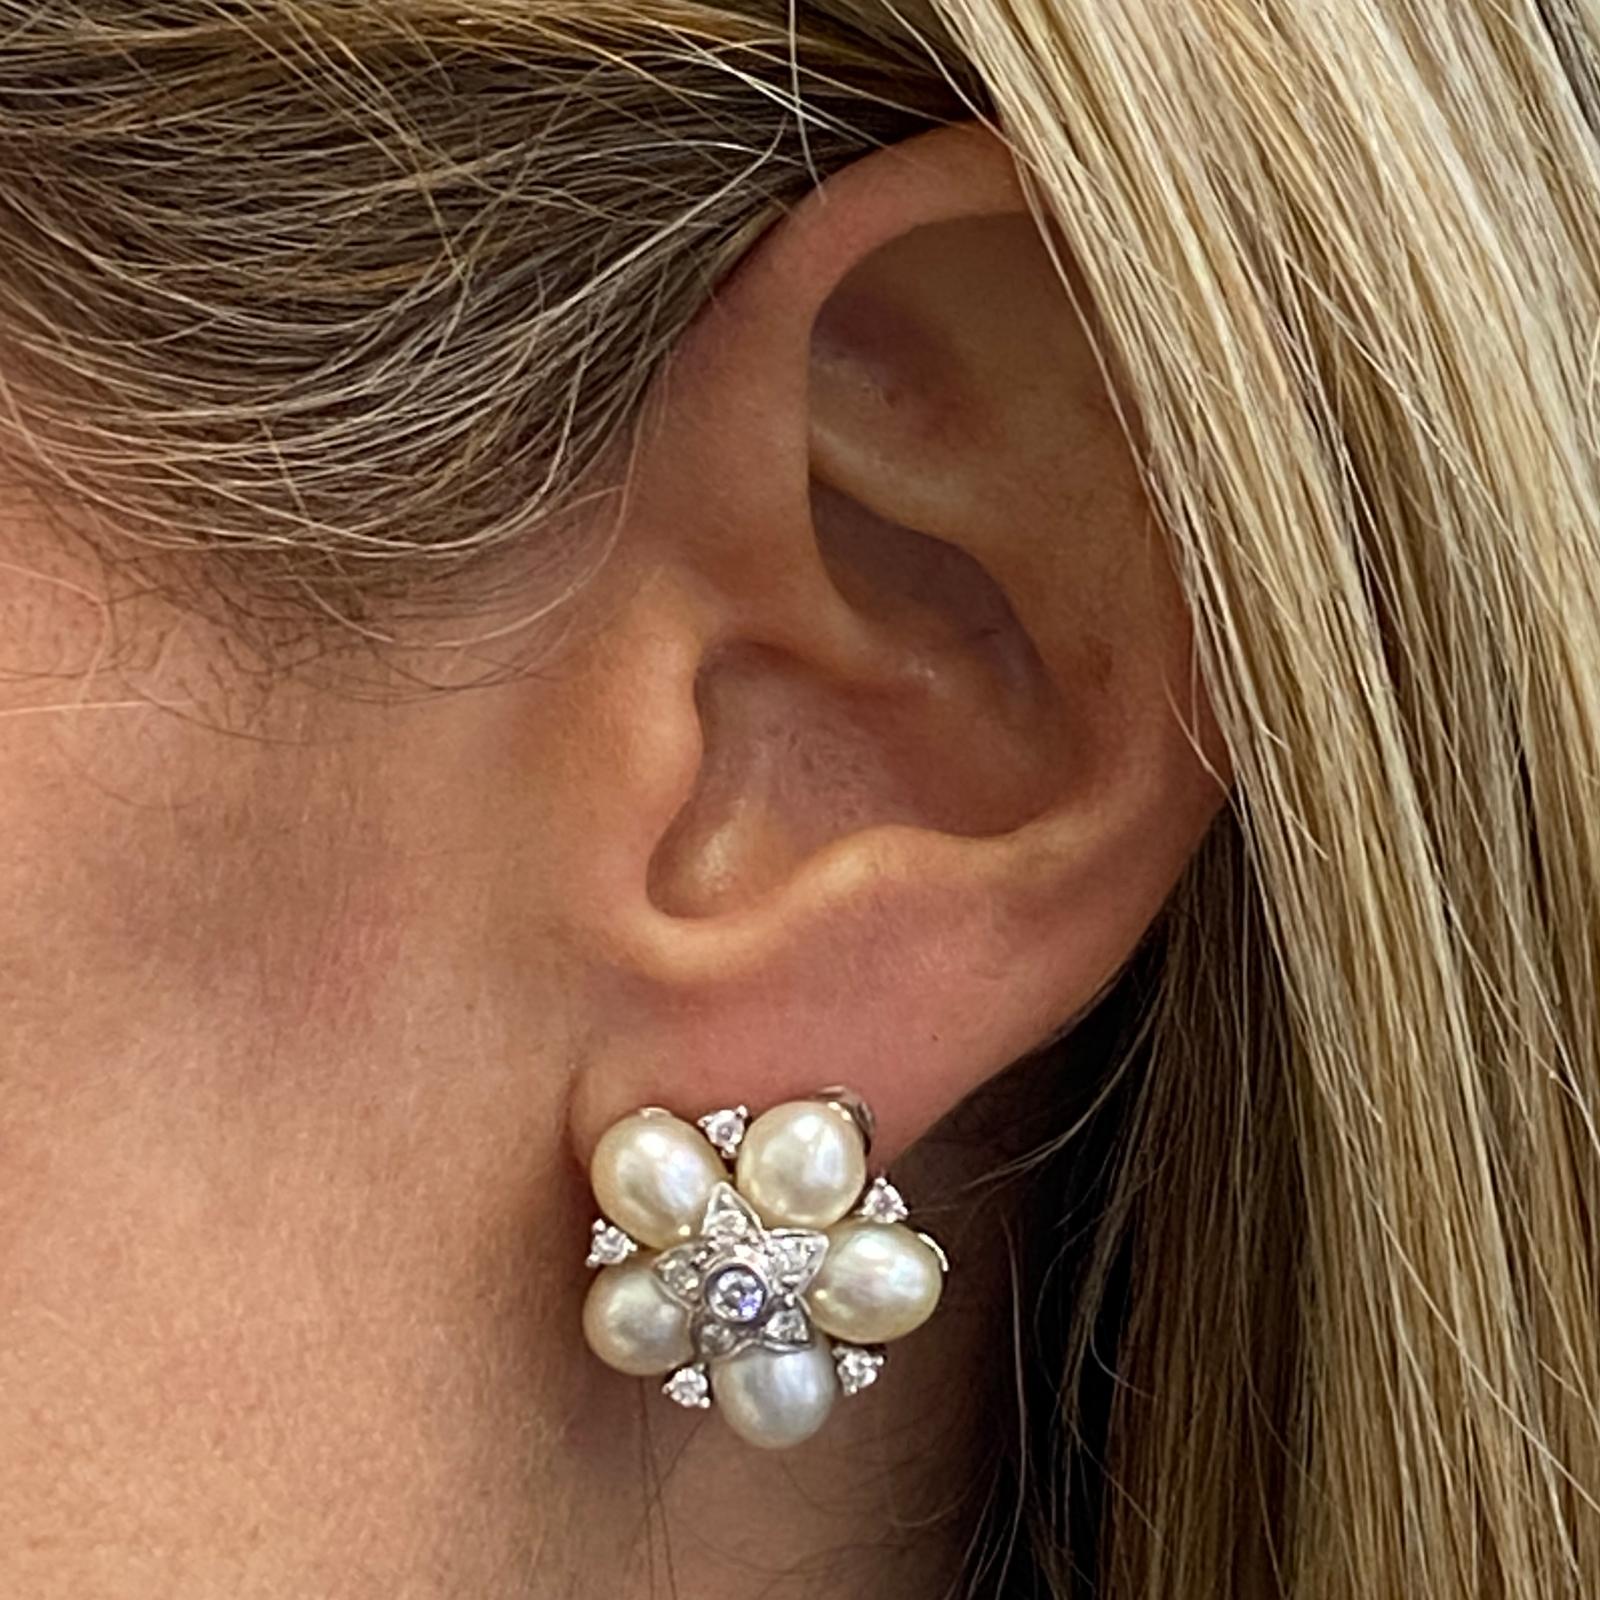 Diamond pearl estate earrings fashioned in 18 karat white gold. The earrings feature round brilliant cut diamonds weighing .50 carat total weight and graded G-H color and VS clarity. The earrings also are set with 10 white cultured pearls and